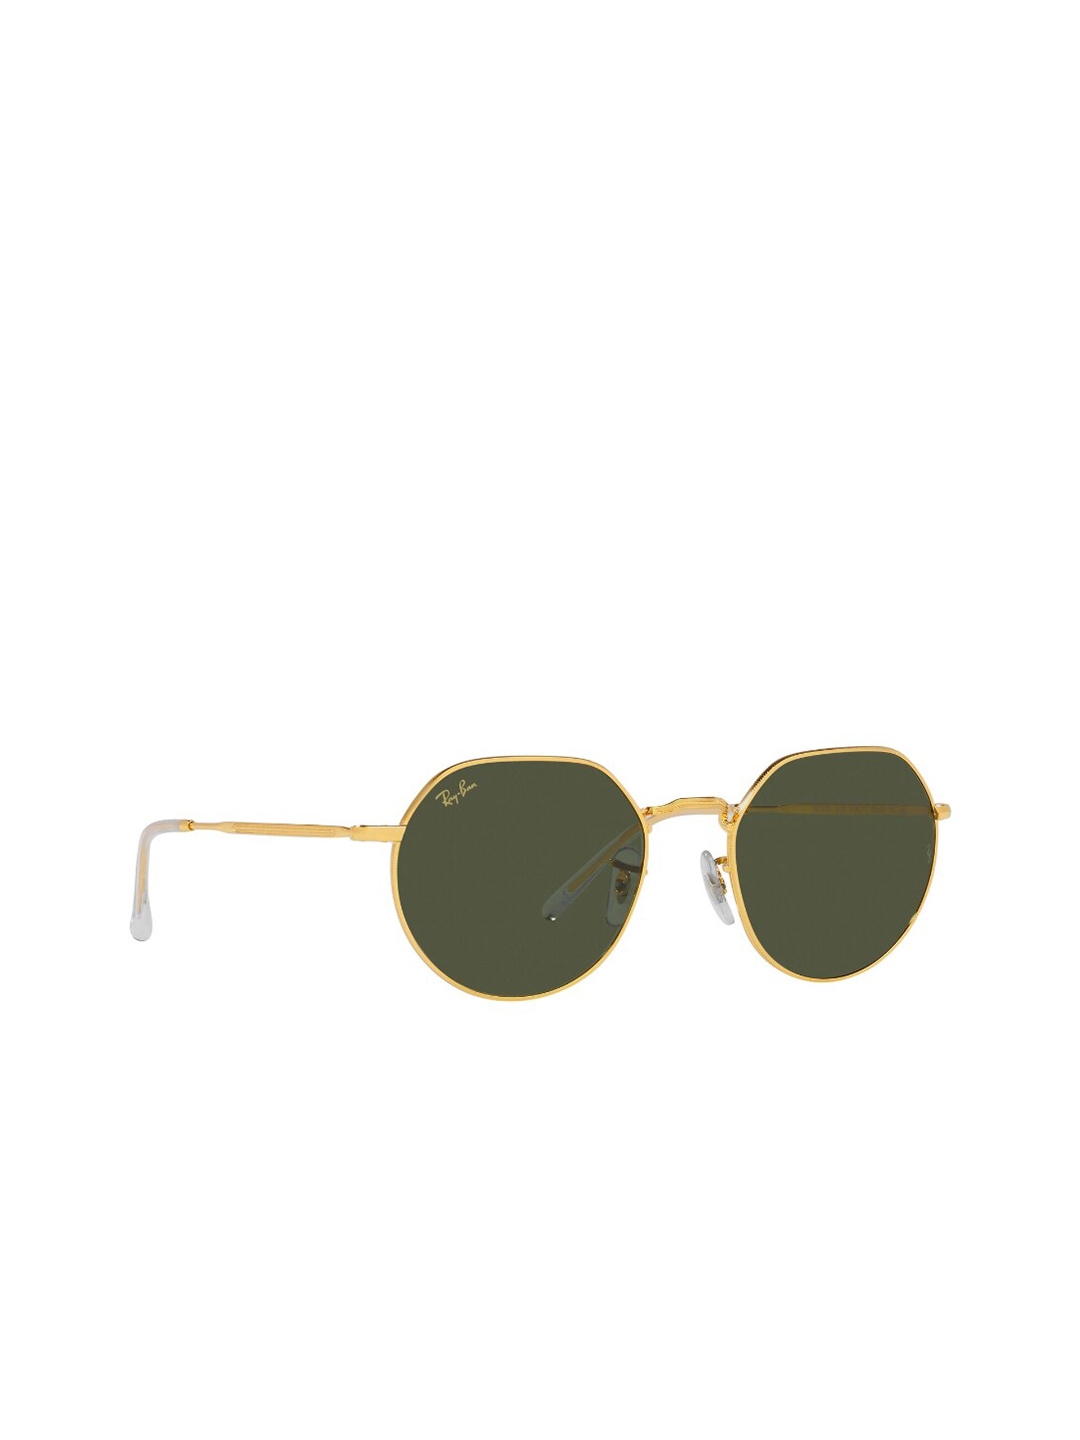 Buy Ray Ban Unisex Green Lens & Gold Toned UV Protected Oversized ...